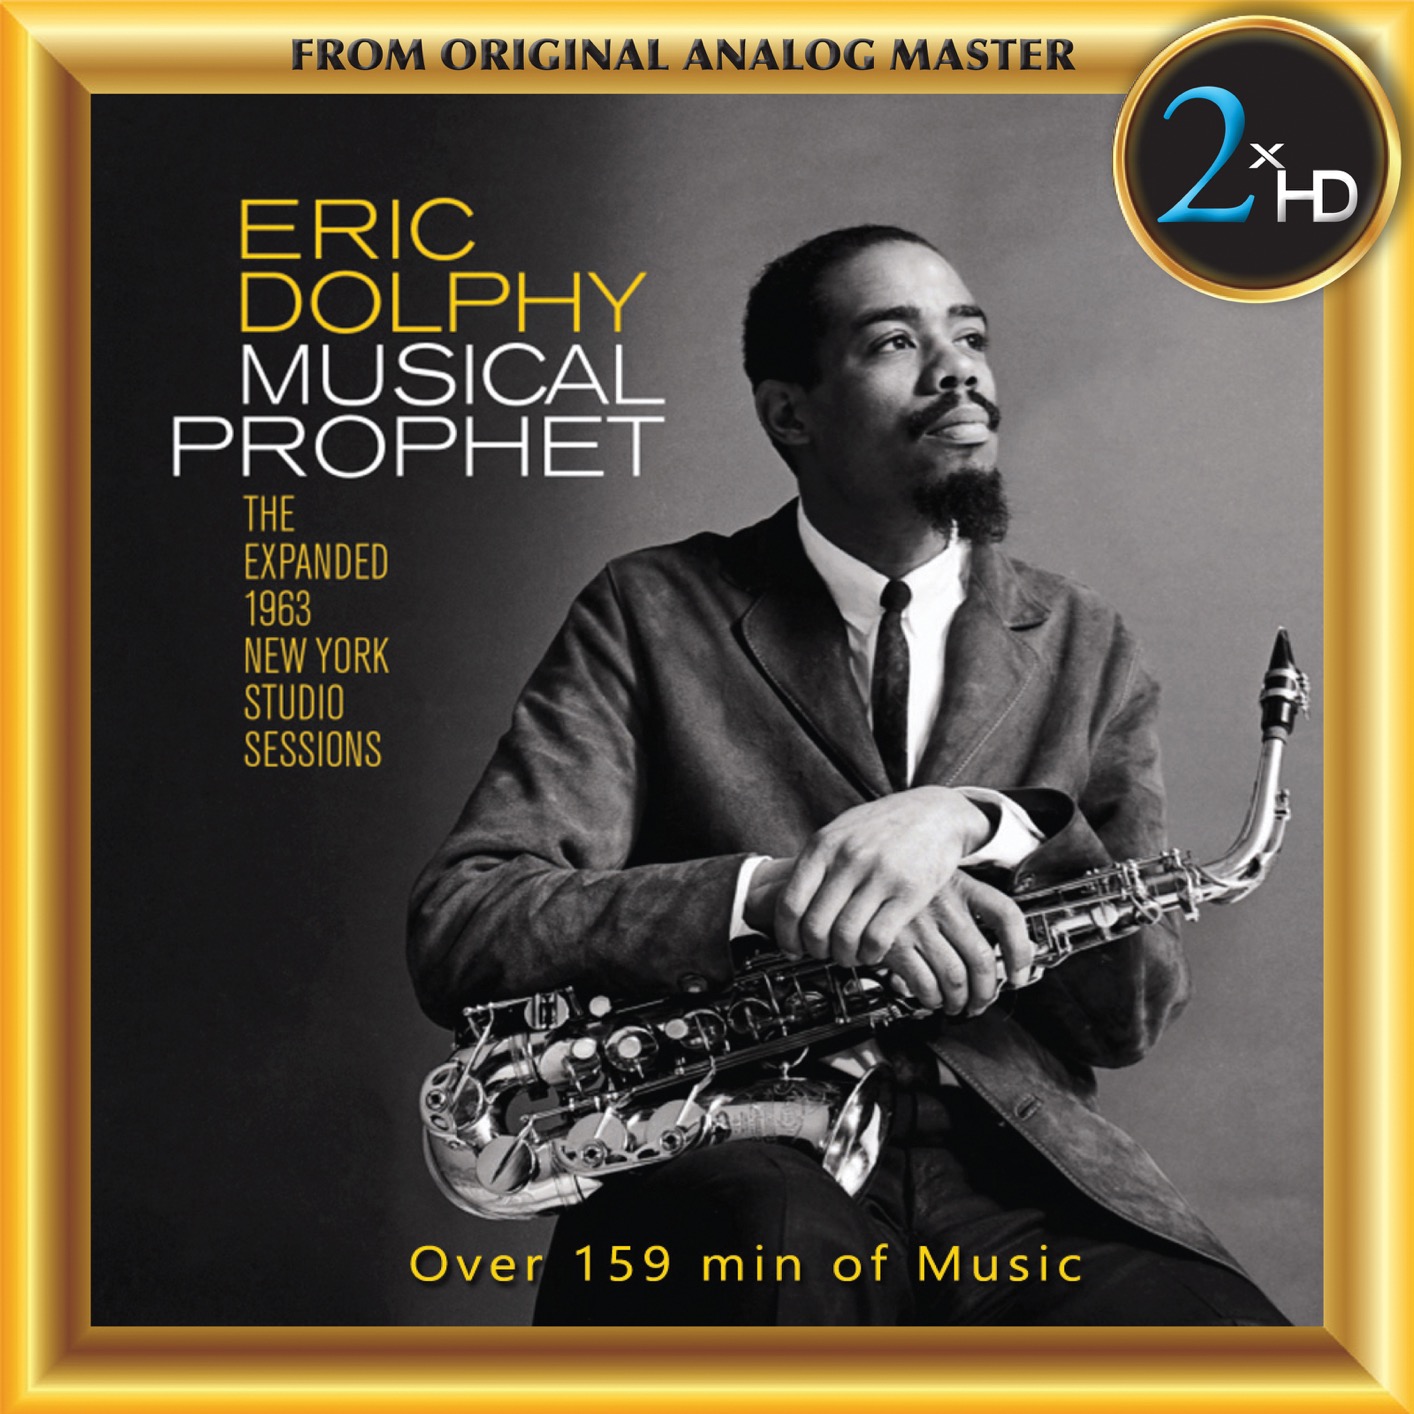 Eric Dolphy – Musical Prophet: The Expanded 1963 New York Studio Sessions (2019) [FLAC 24bit/192kHz]